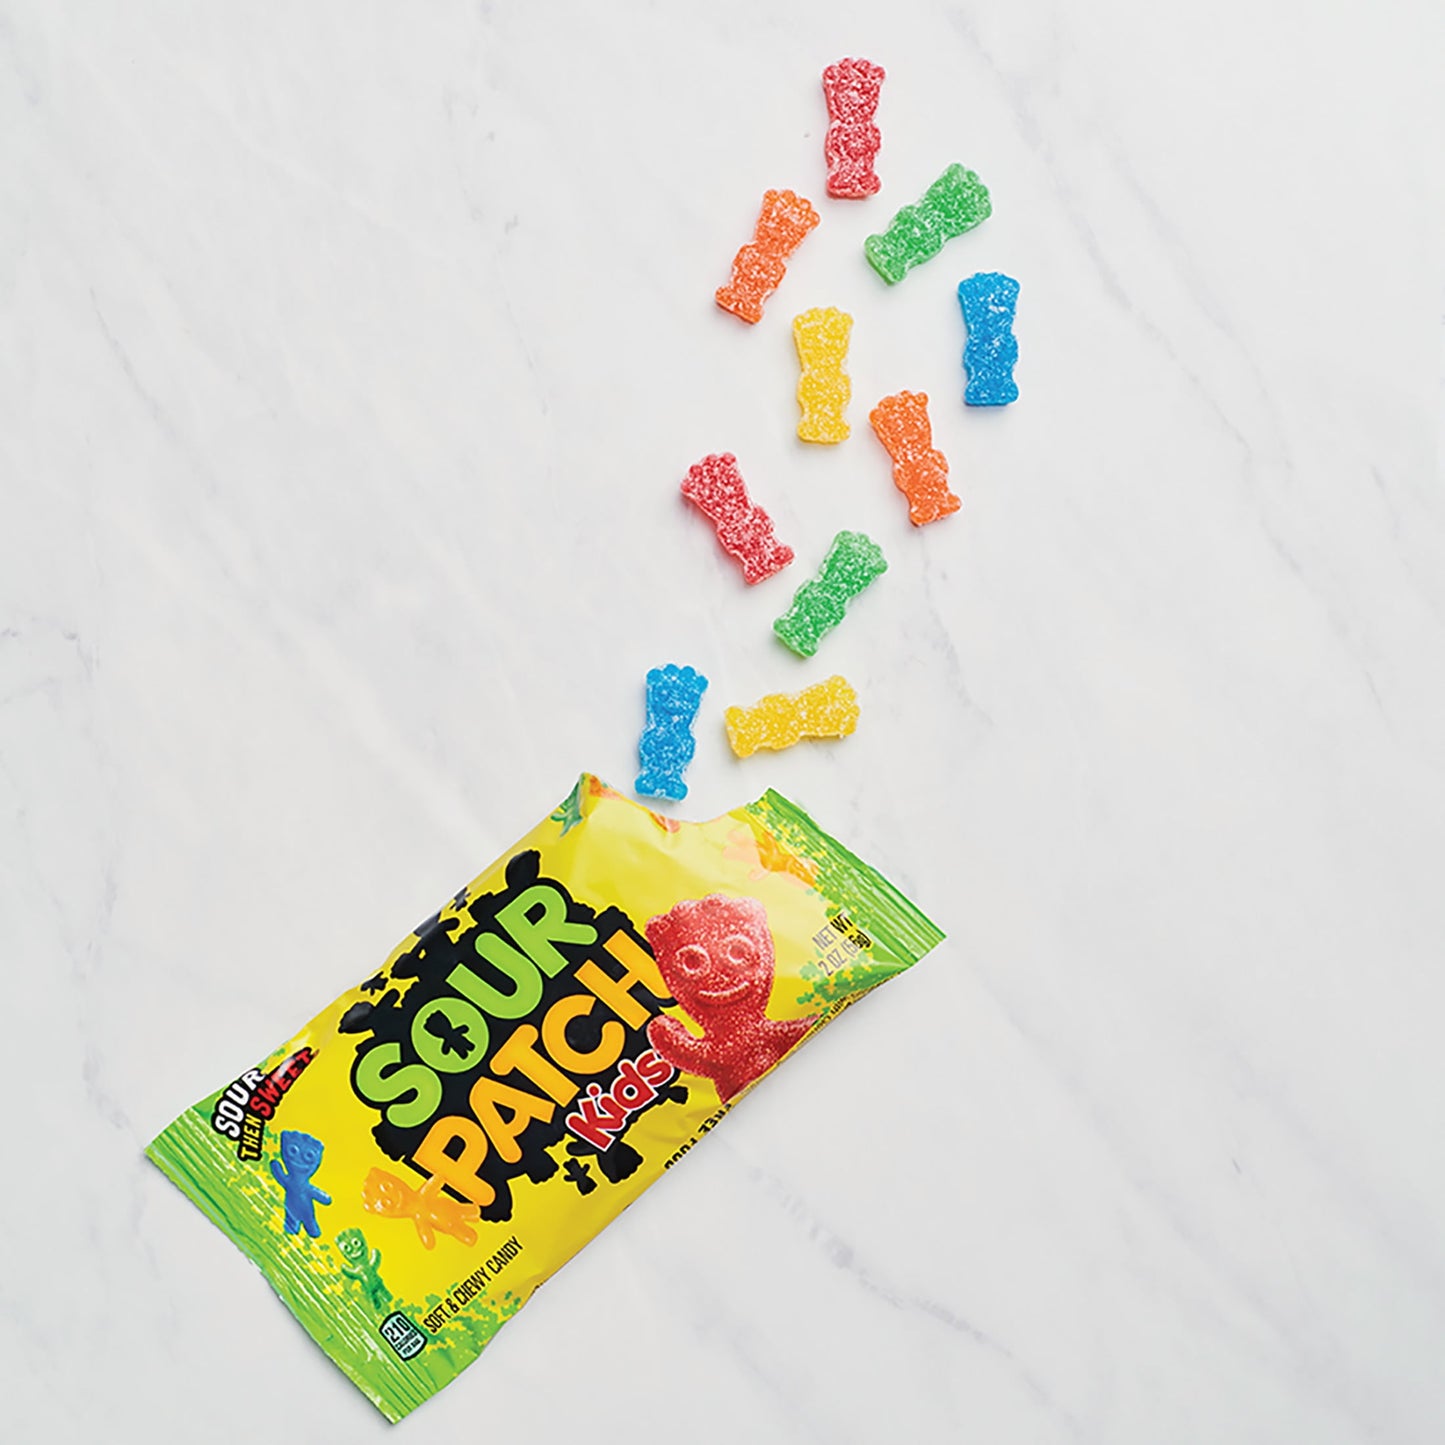 and SWEDISH FISH Mini Soft & Chewy Candy Variety Pack, 18 - 2 Oz Bags